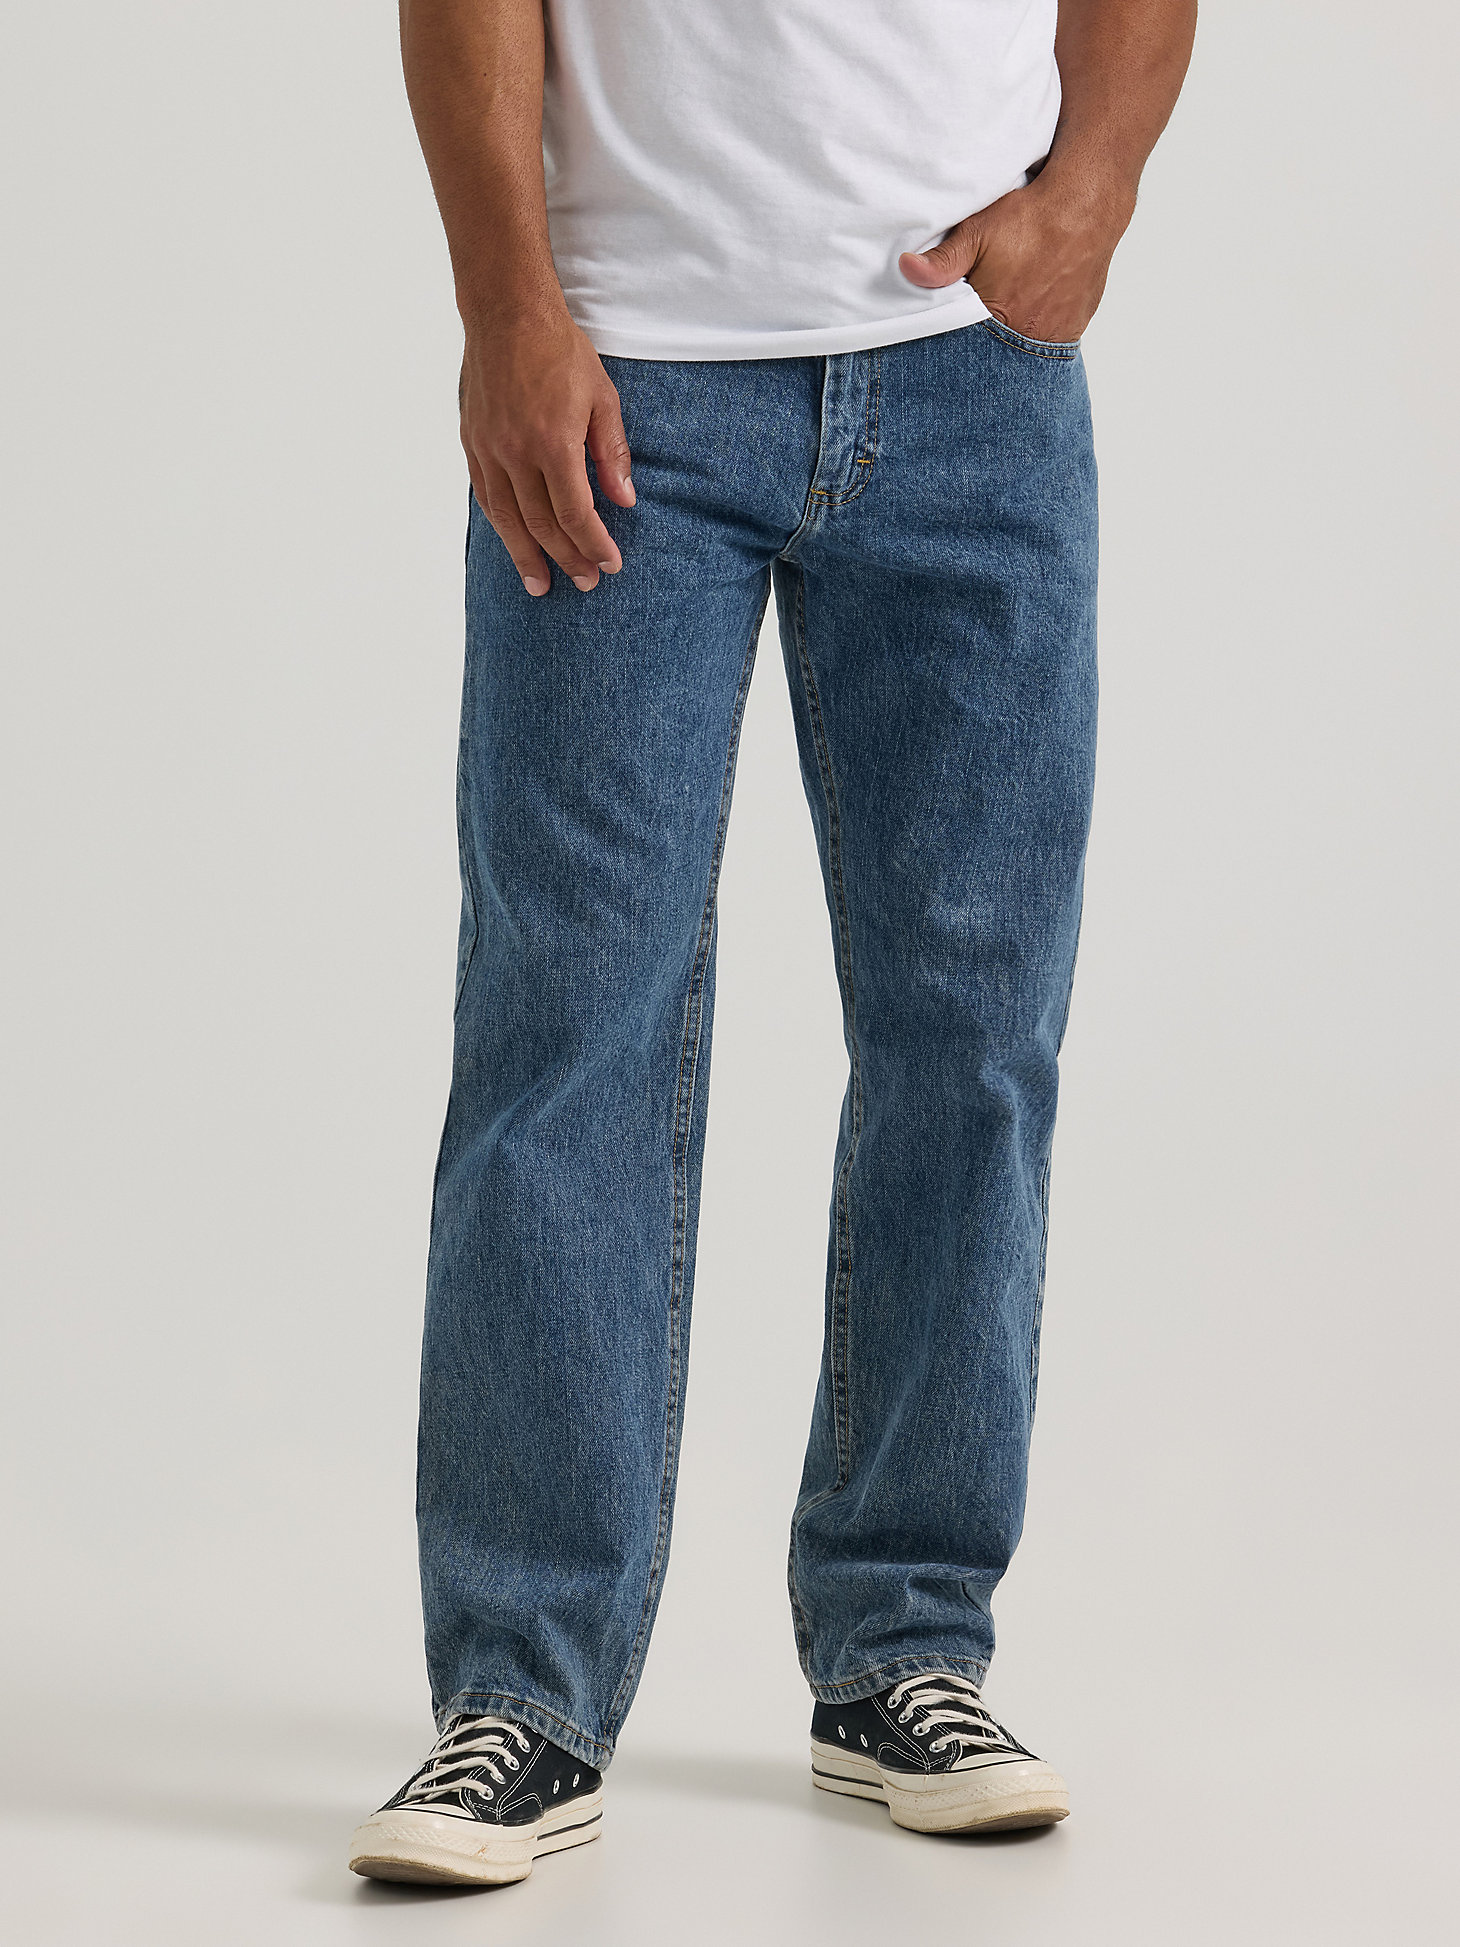 Men’s Relaxed Fit Straight Leg Jeans in Medium Stone main view